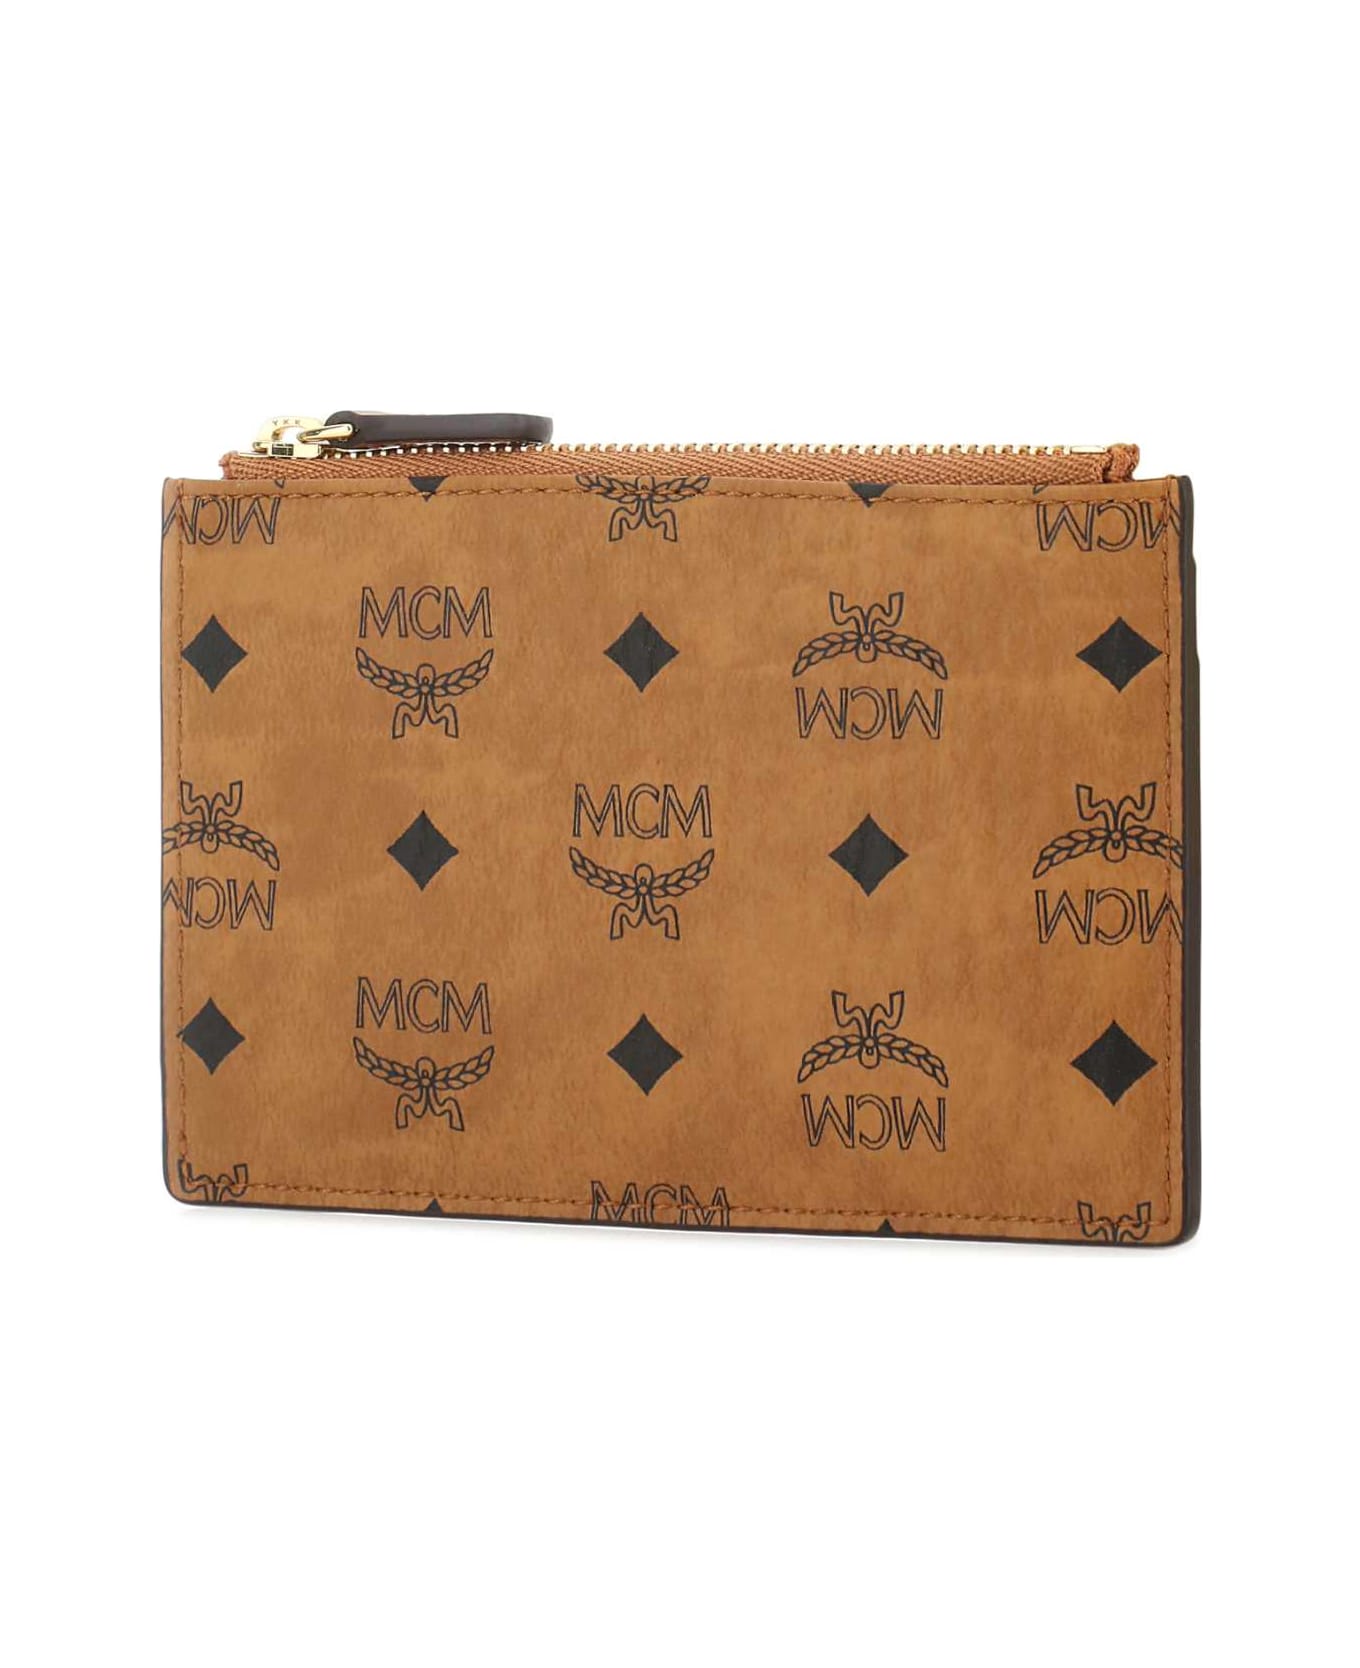 MCM Printed Canvas Aren Card Holder - CO